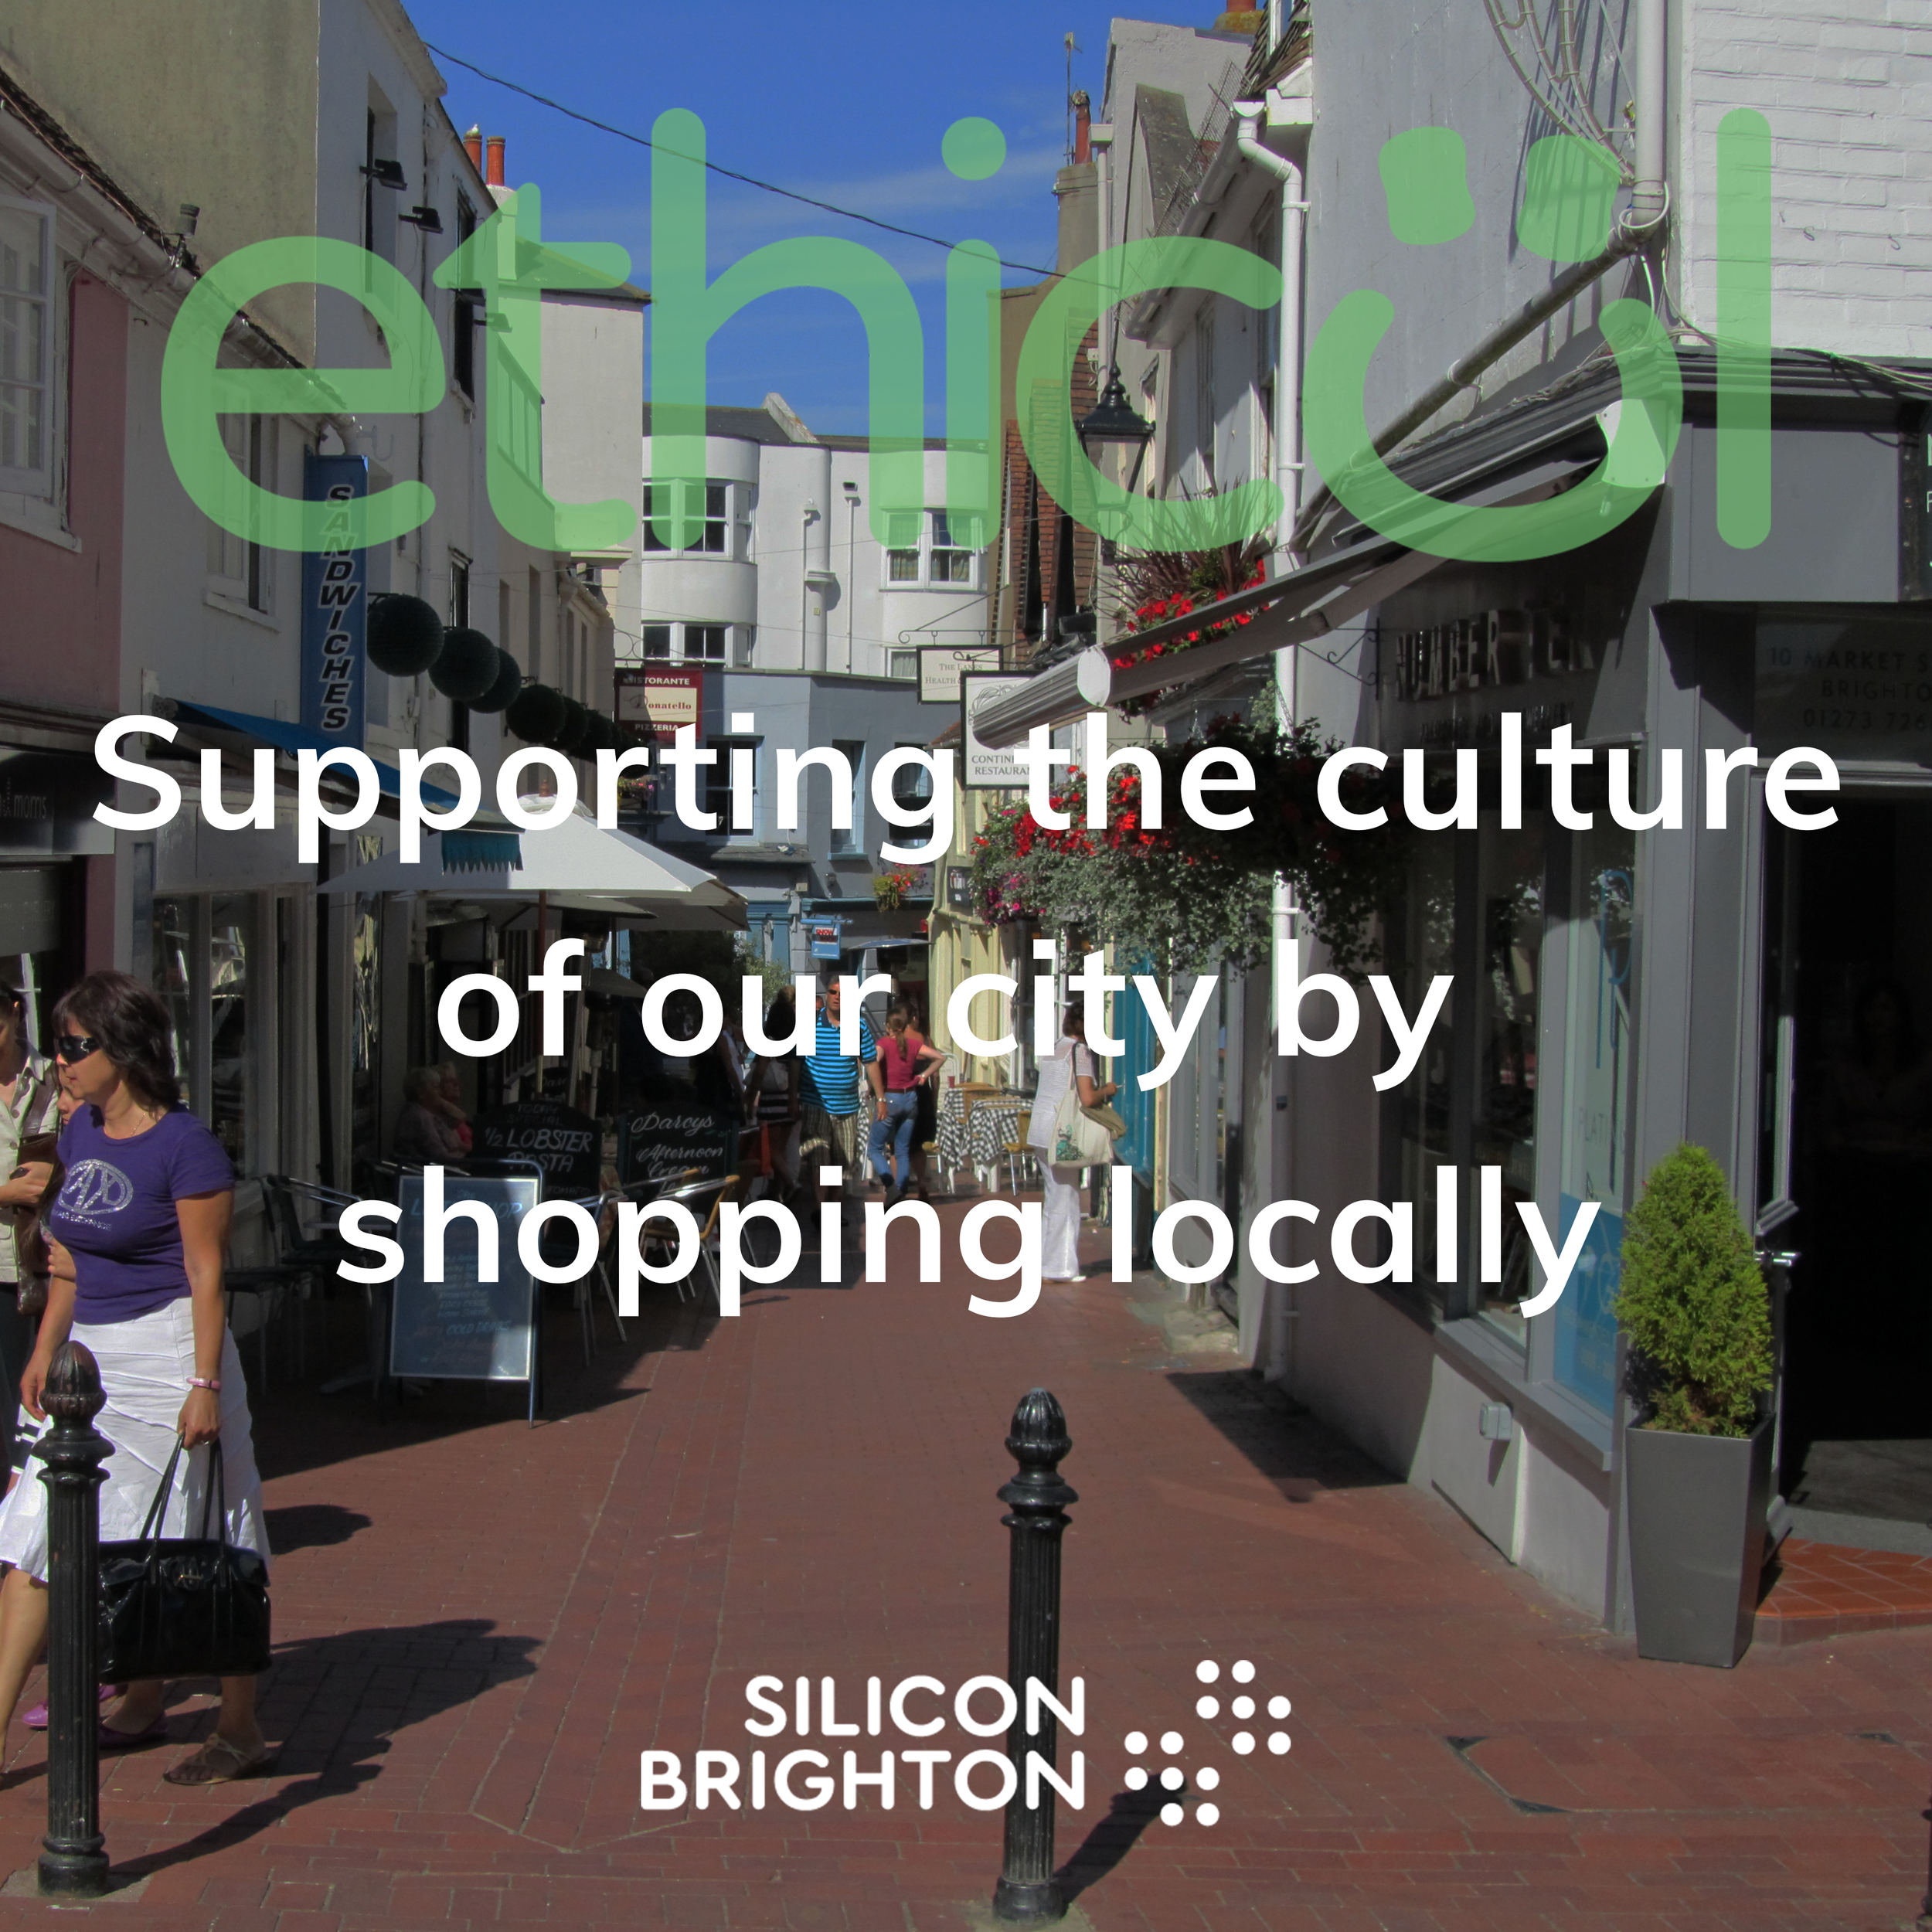 Ethicul: How you can support the culture of our city by shopping locally